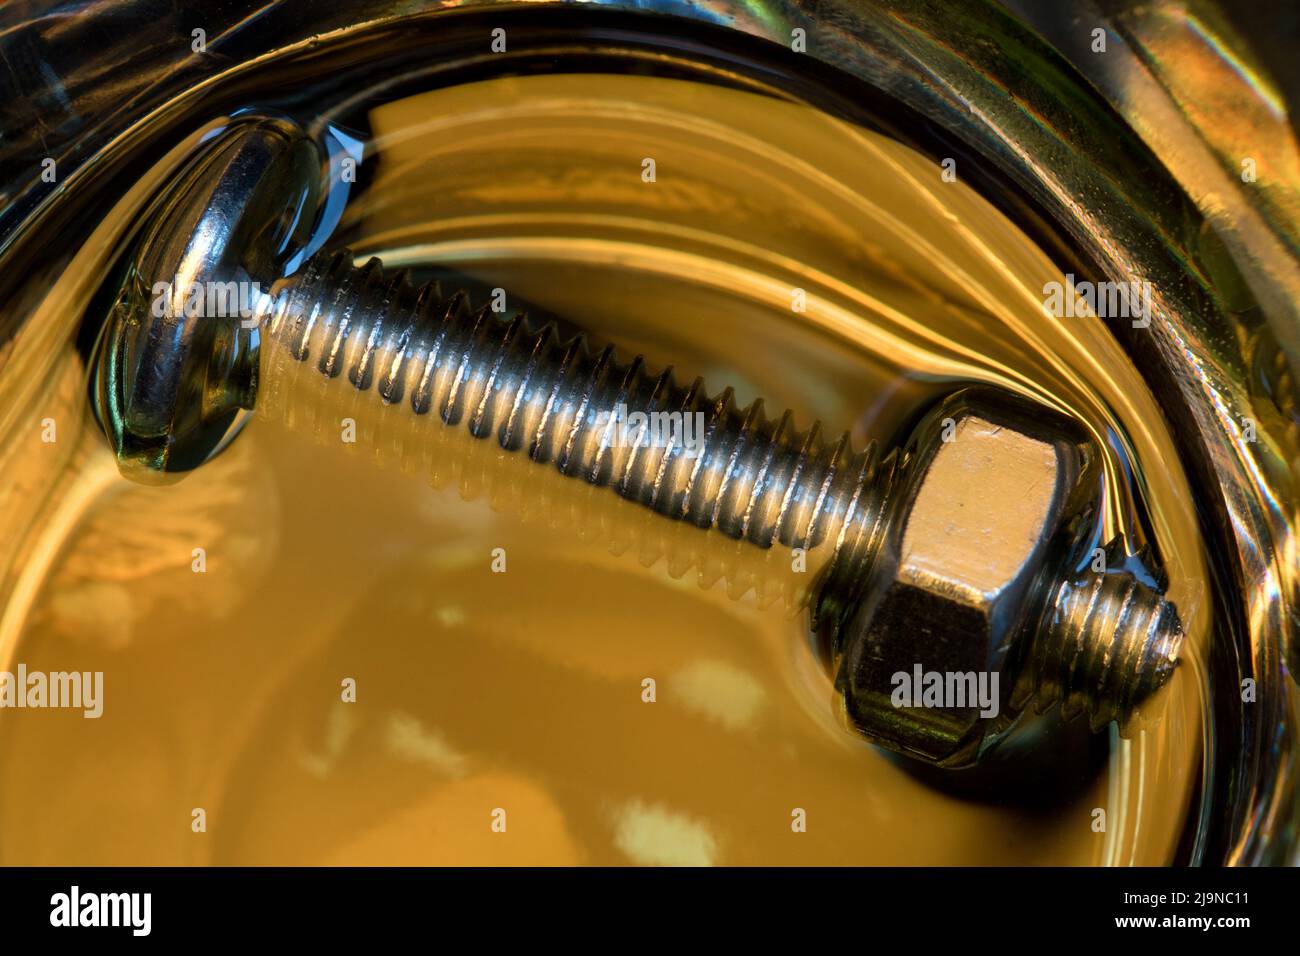 Metallic nuts and bolts in lubrication oil Stock Photo